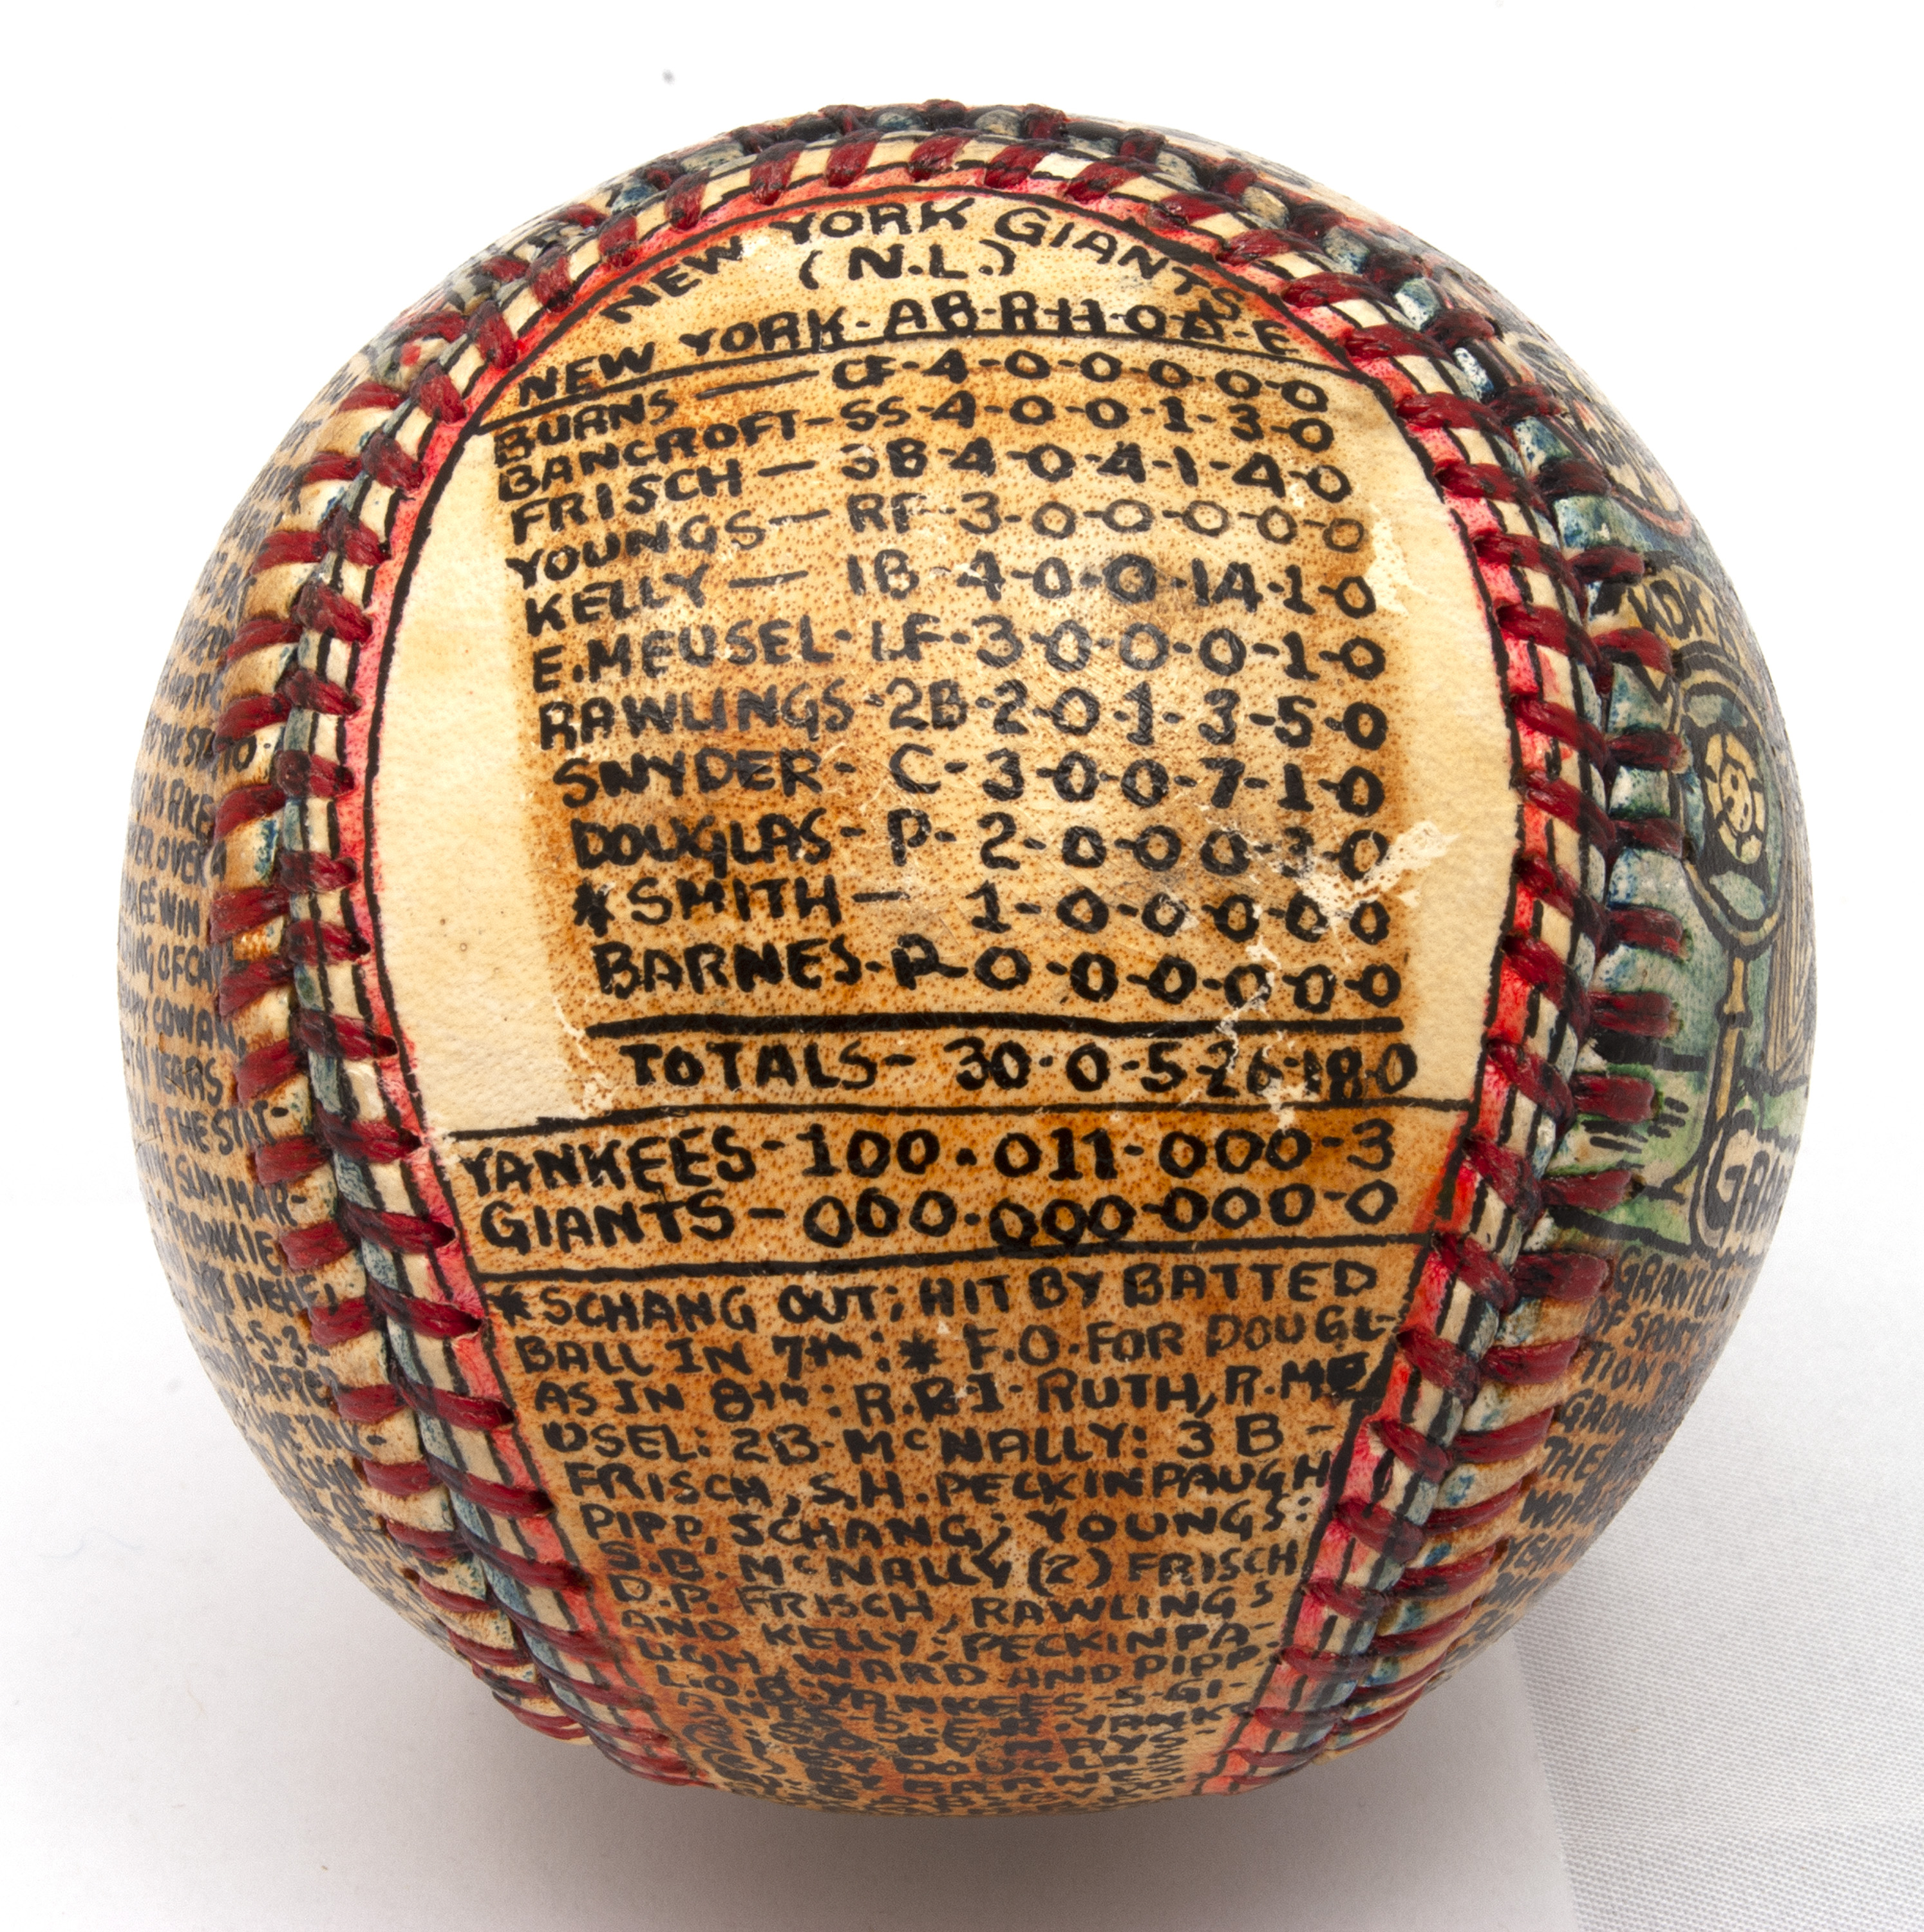 Another angle on the baseball transformed by self-taught artist George Sosnak, showing statistics and facts about the 1921 World Series between the Yankees and the Giants.